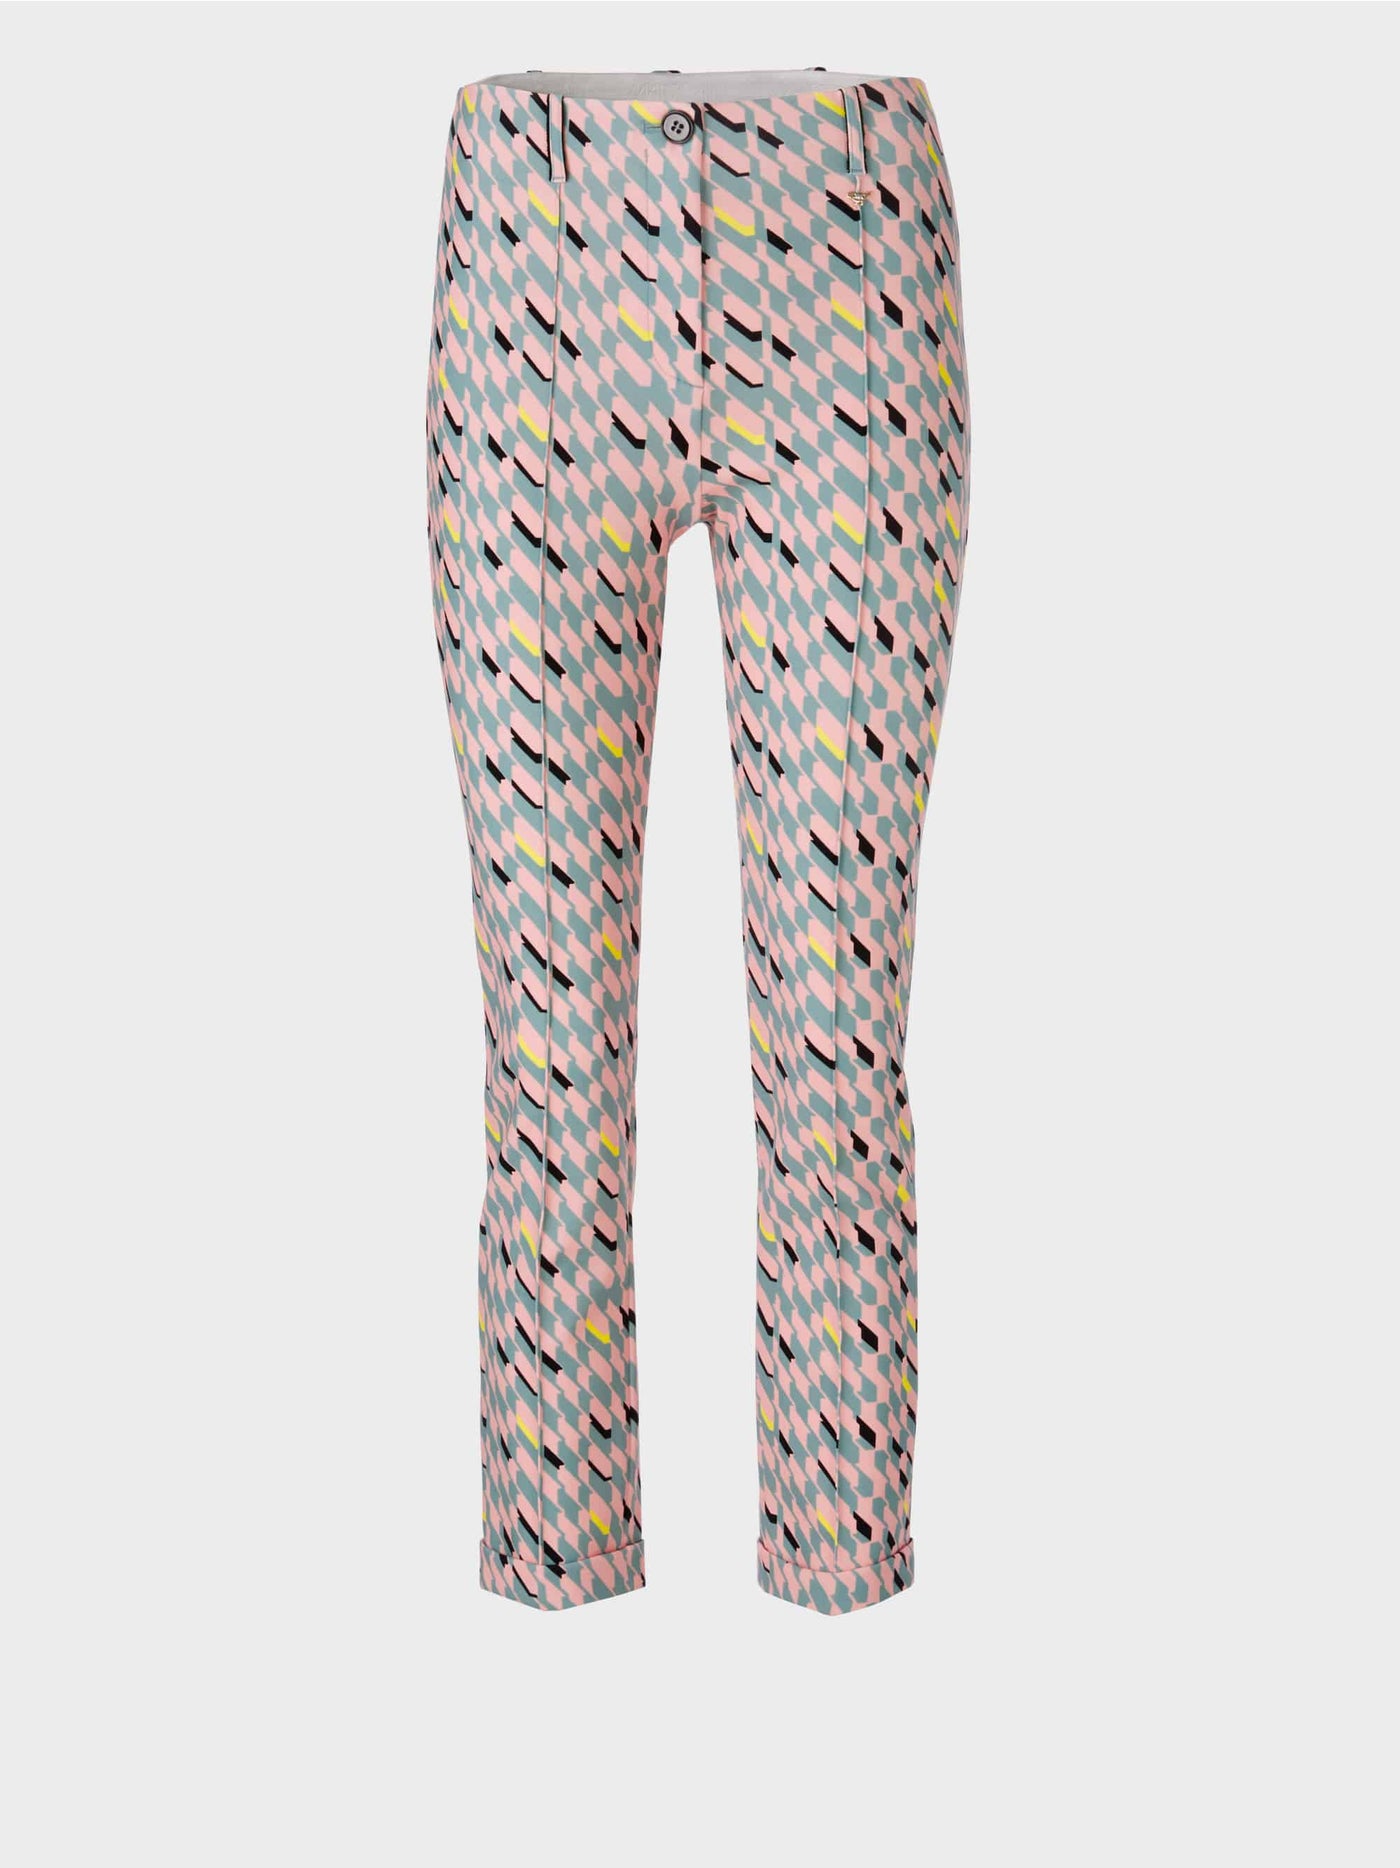 Marc Cain Pants SYDNEY with graphic design